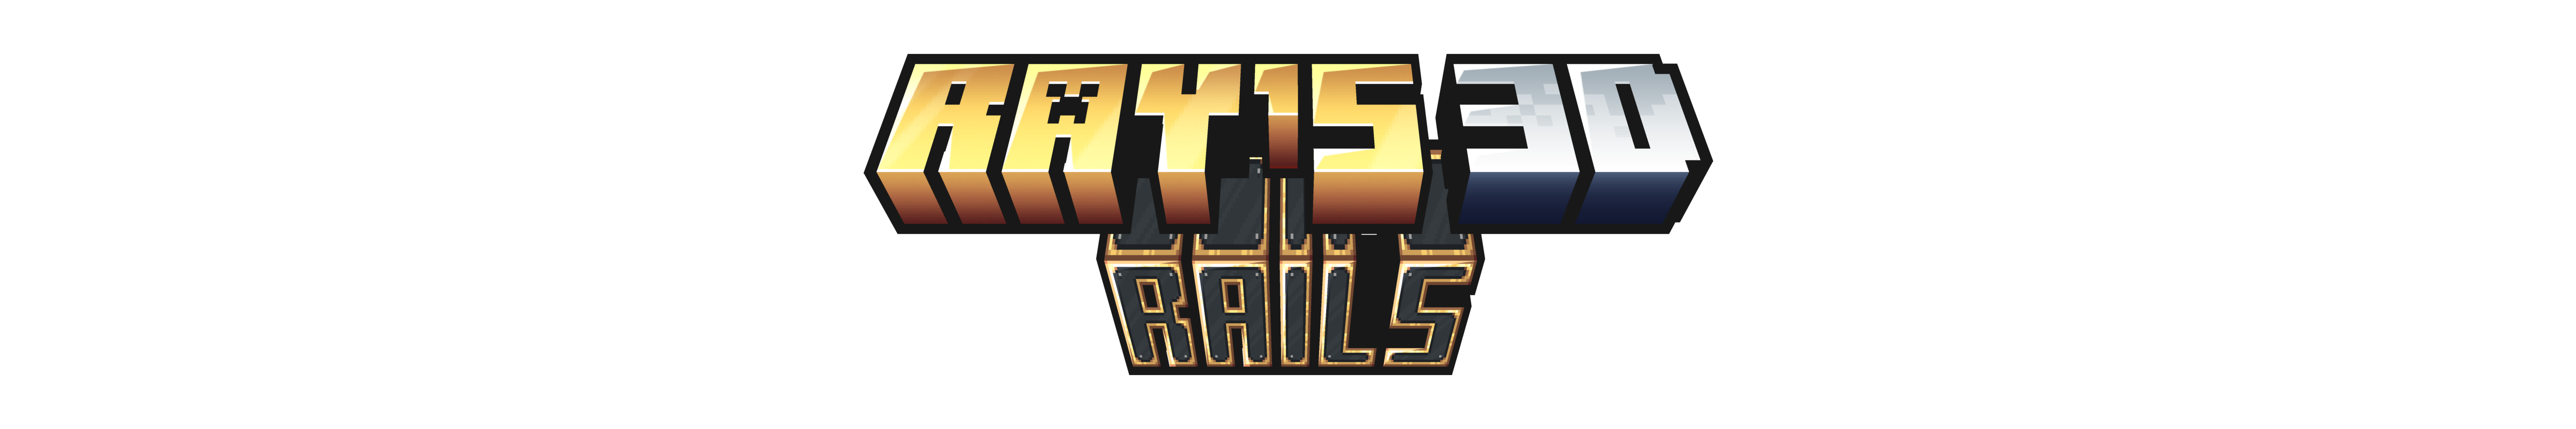 rays 3d rails title wide